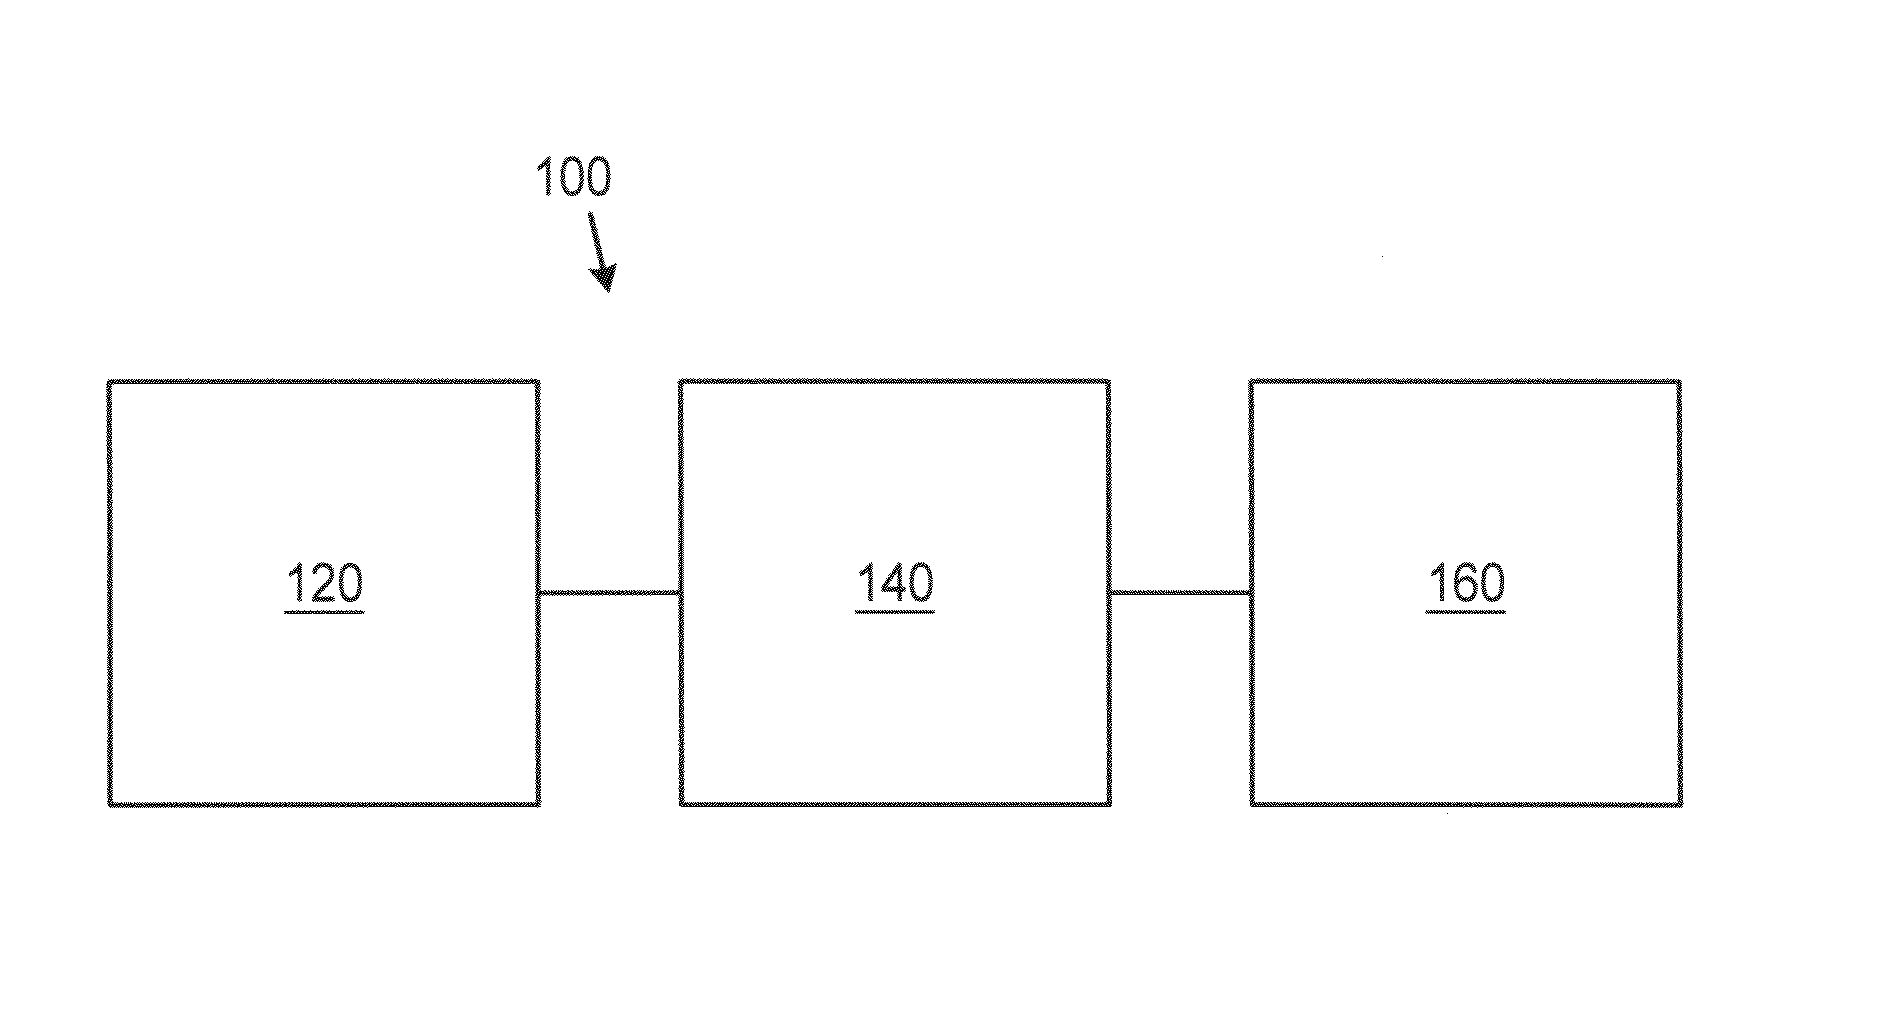 Systems and Methods for tracking and authenticating goods